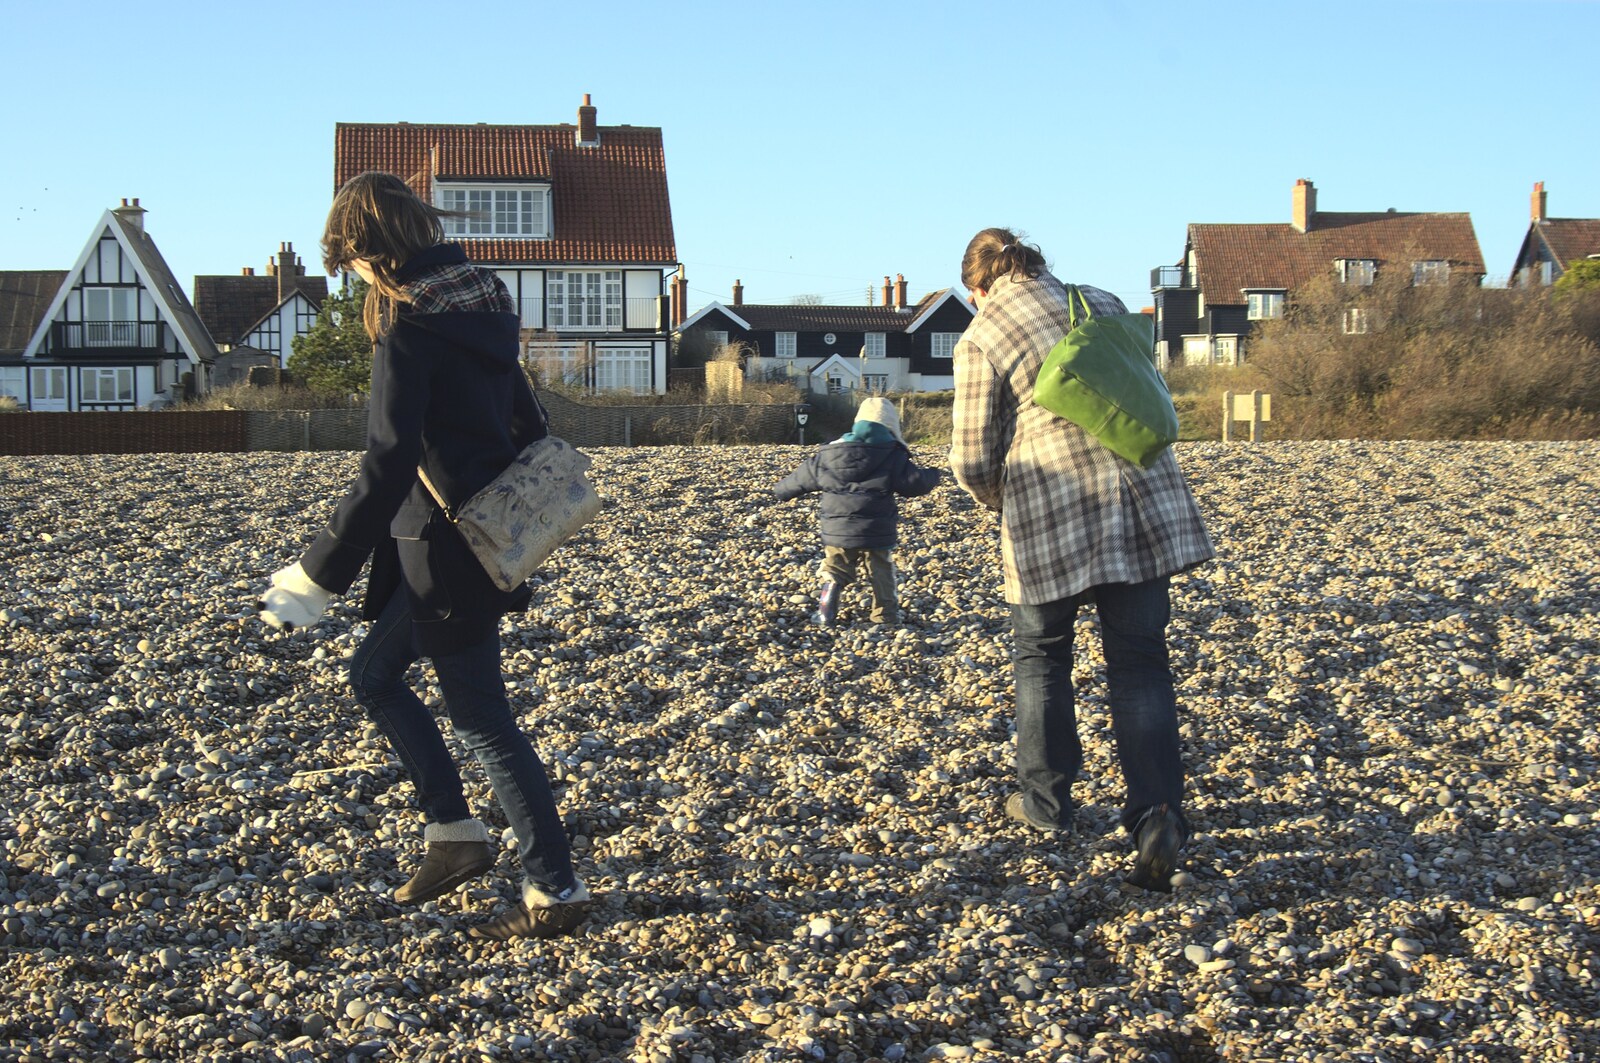 A Trip to Thorpeness, Suffolk - 9th January 2011: Stomping up the gravel